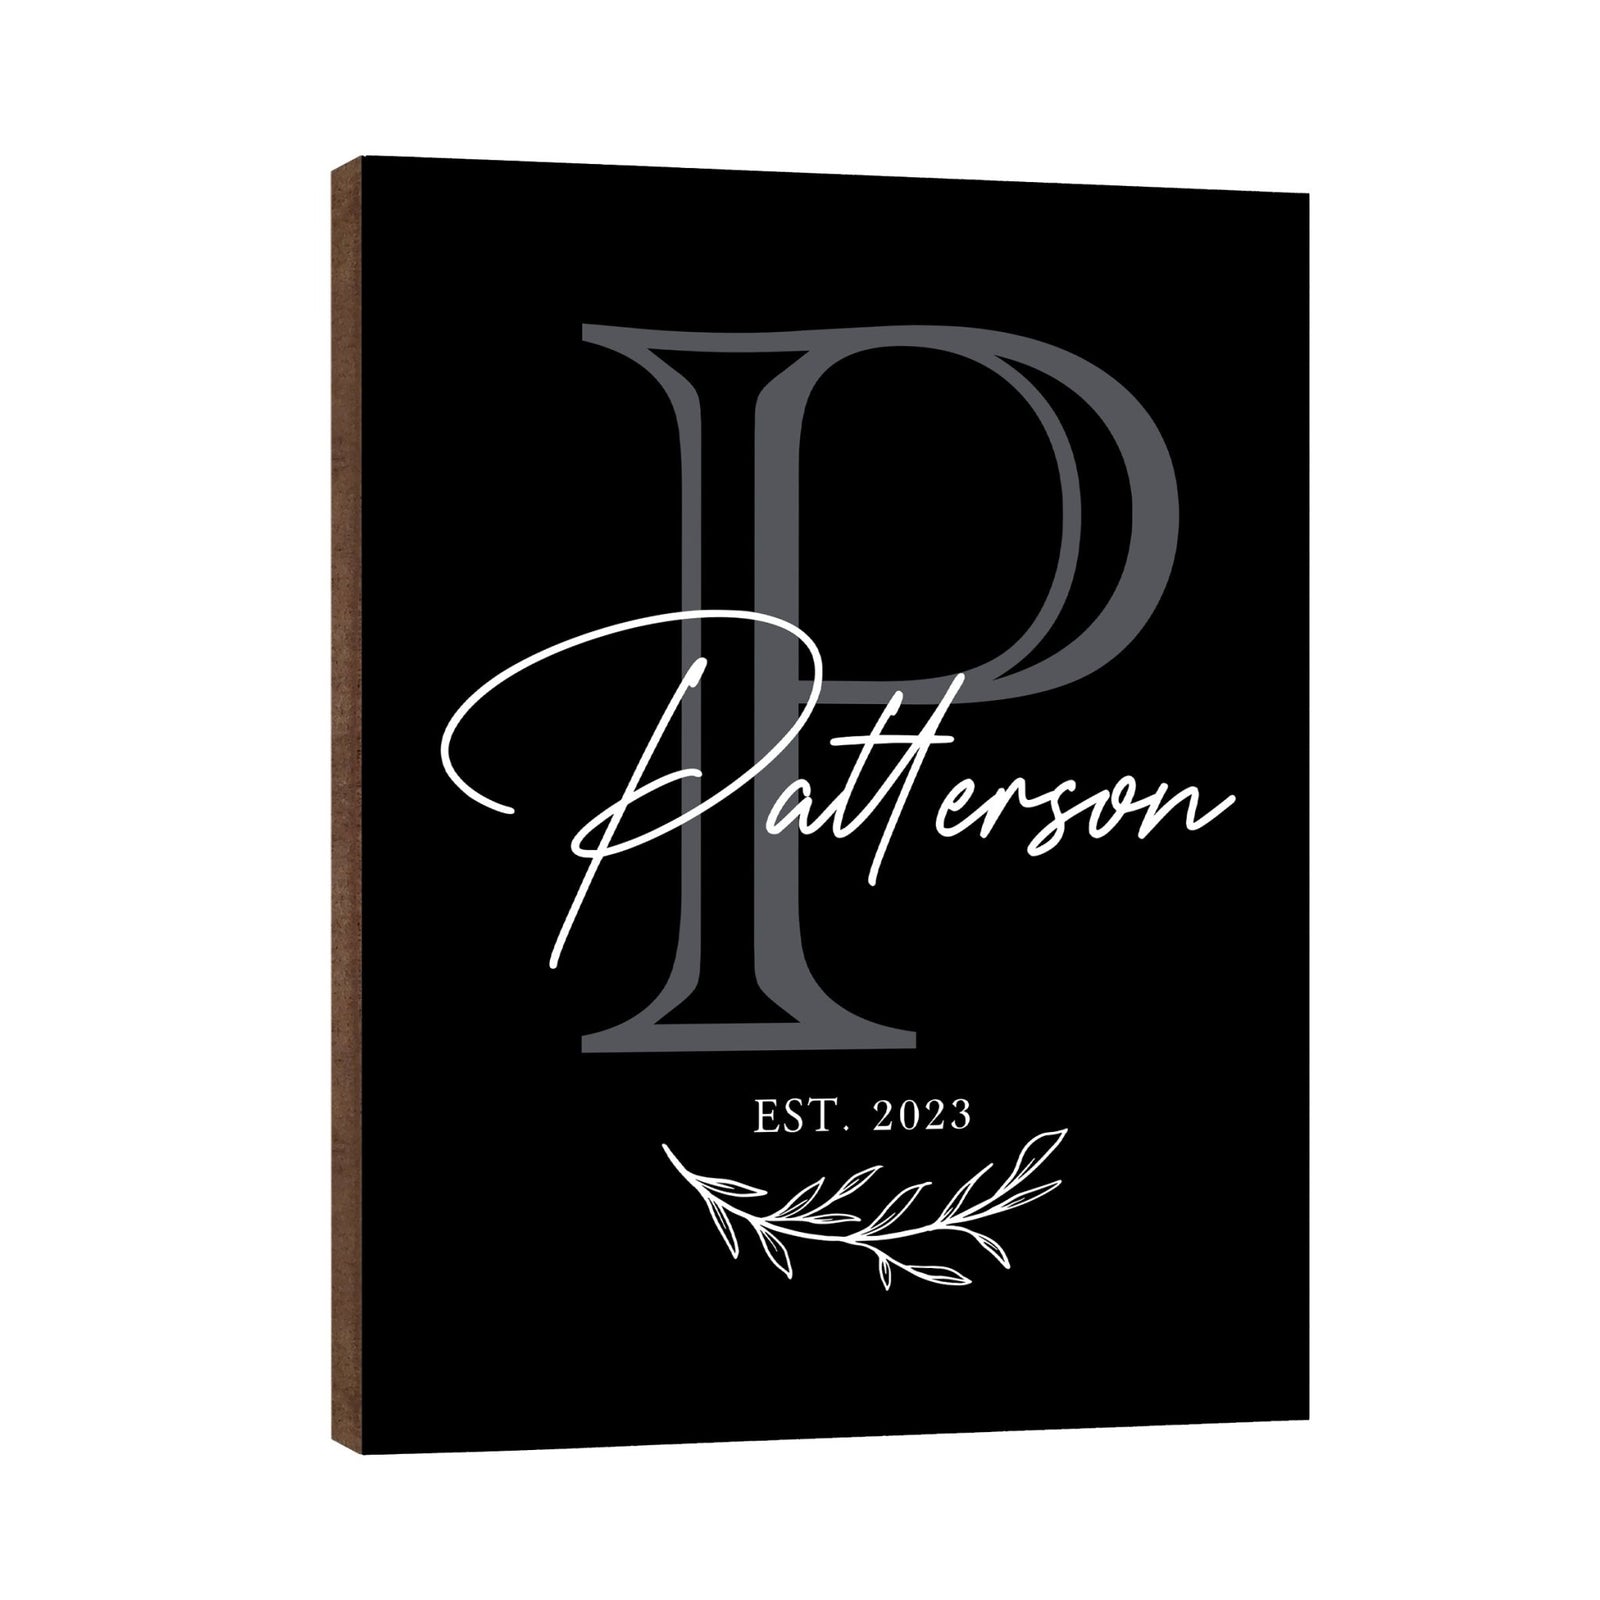 Personalized Family Wall Hanging Plaque for Home Décor - Patterson - LifeSong Milestones